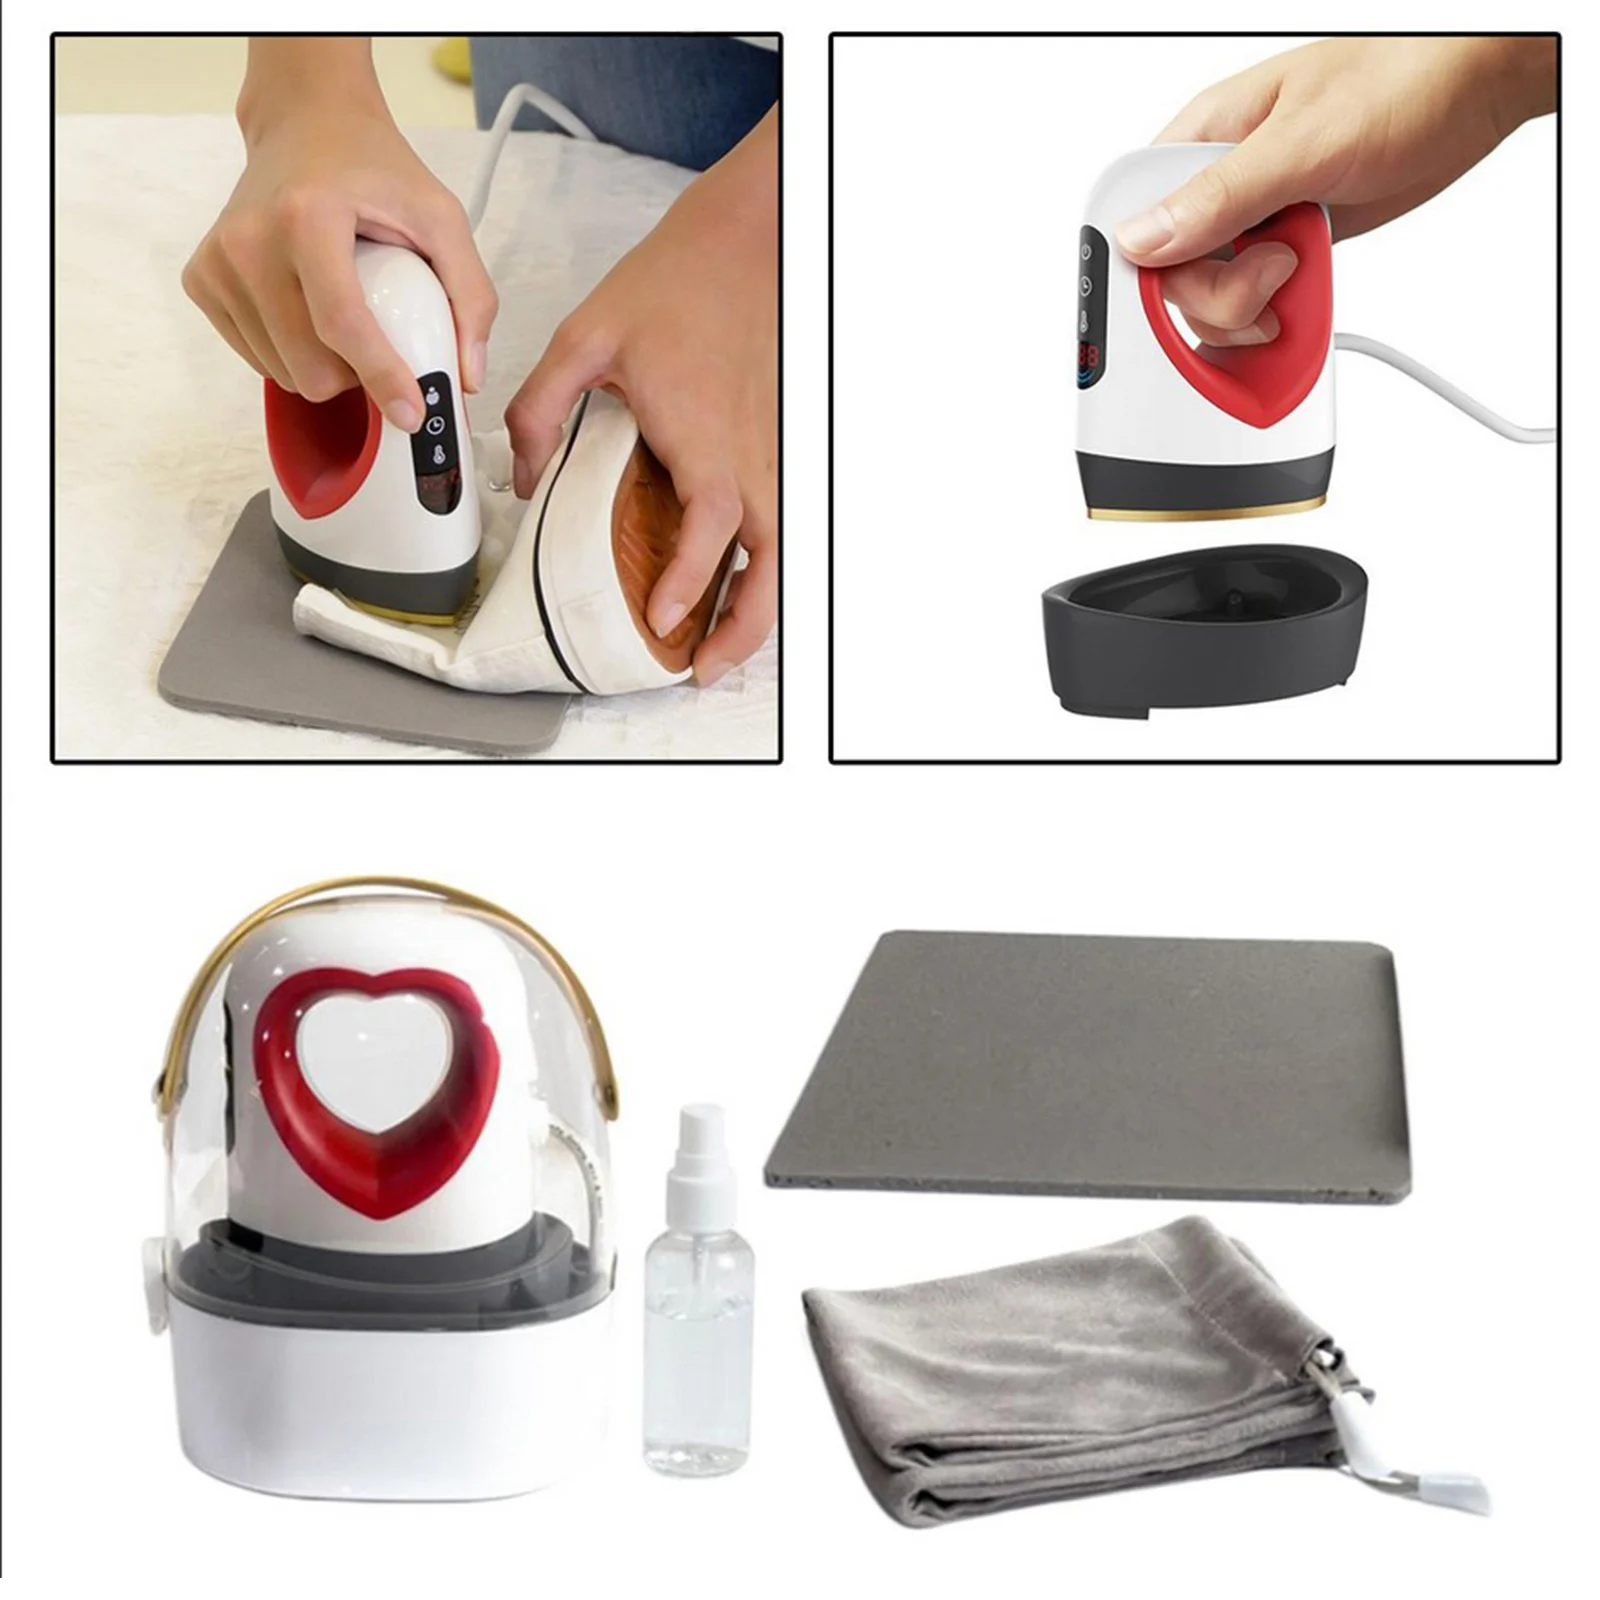 Portable Mini Easy Heat Press Machine LCD Dispaly Heating Transfer Ironing for Shoes Hats Bags Small HTV Vinyl Crafts